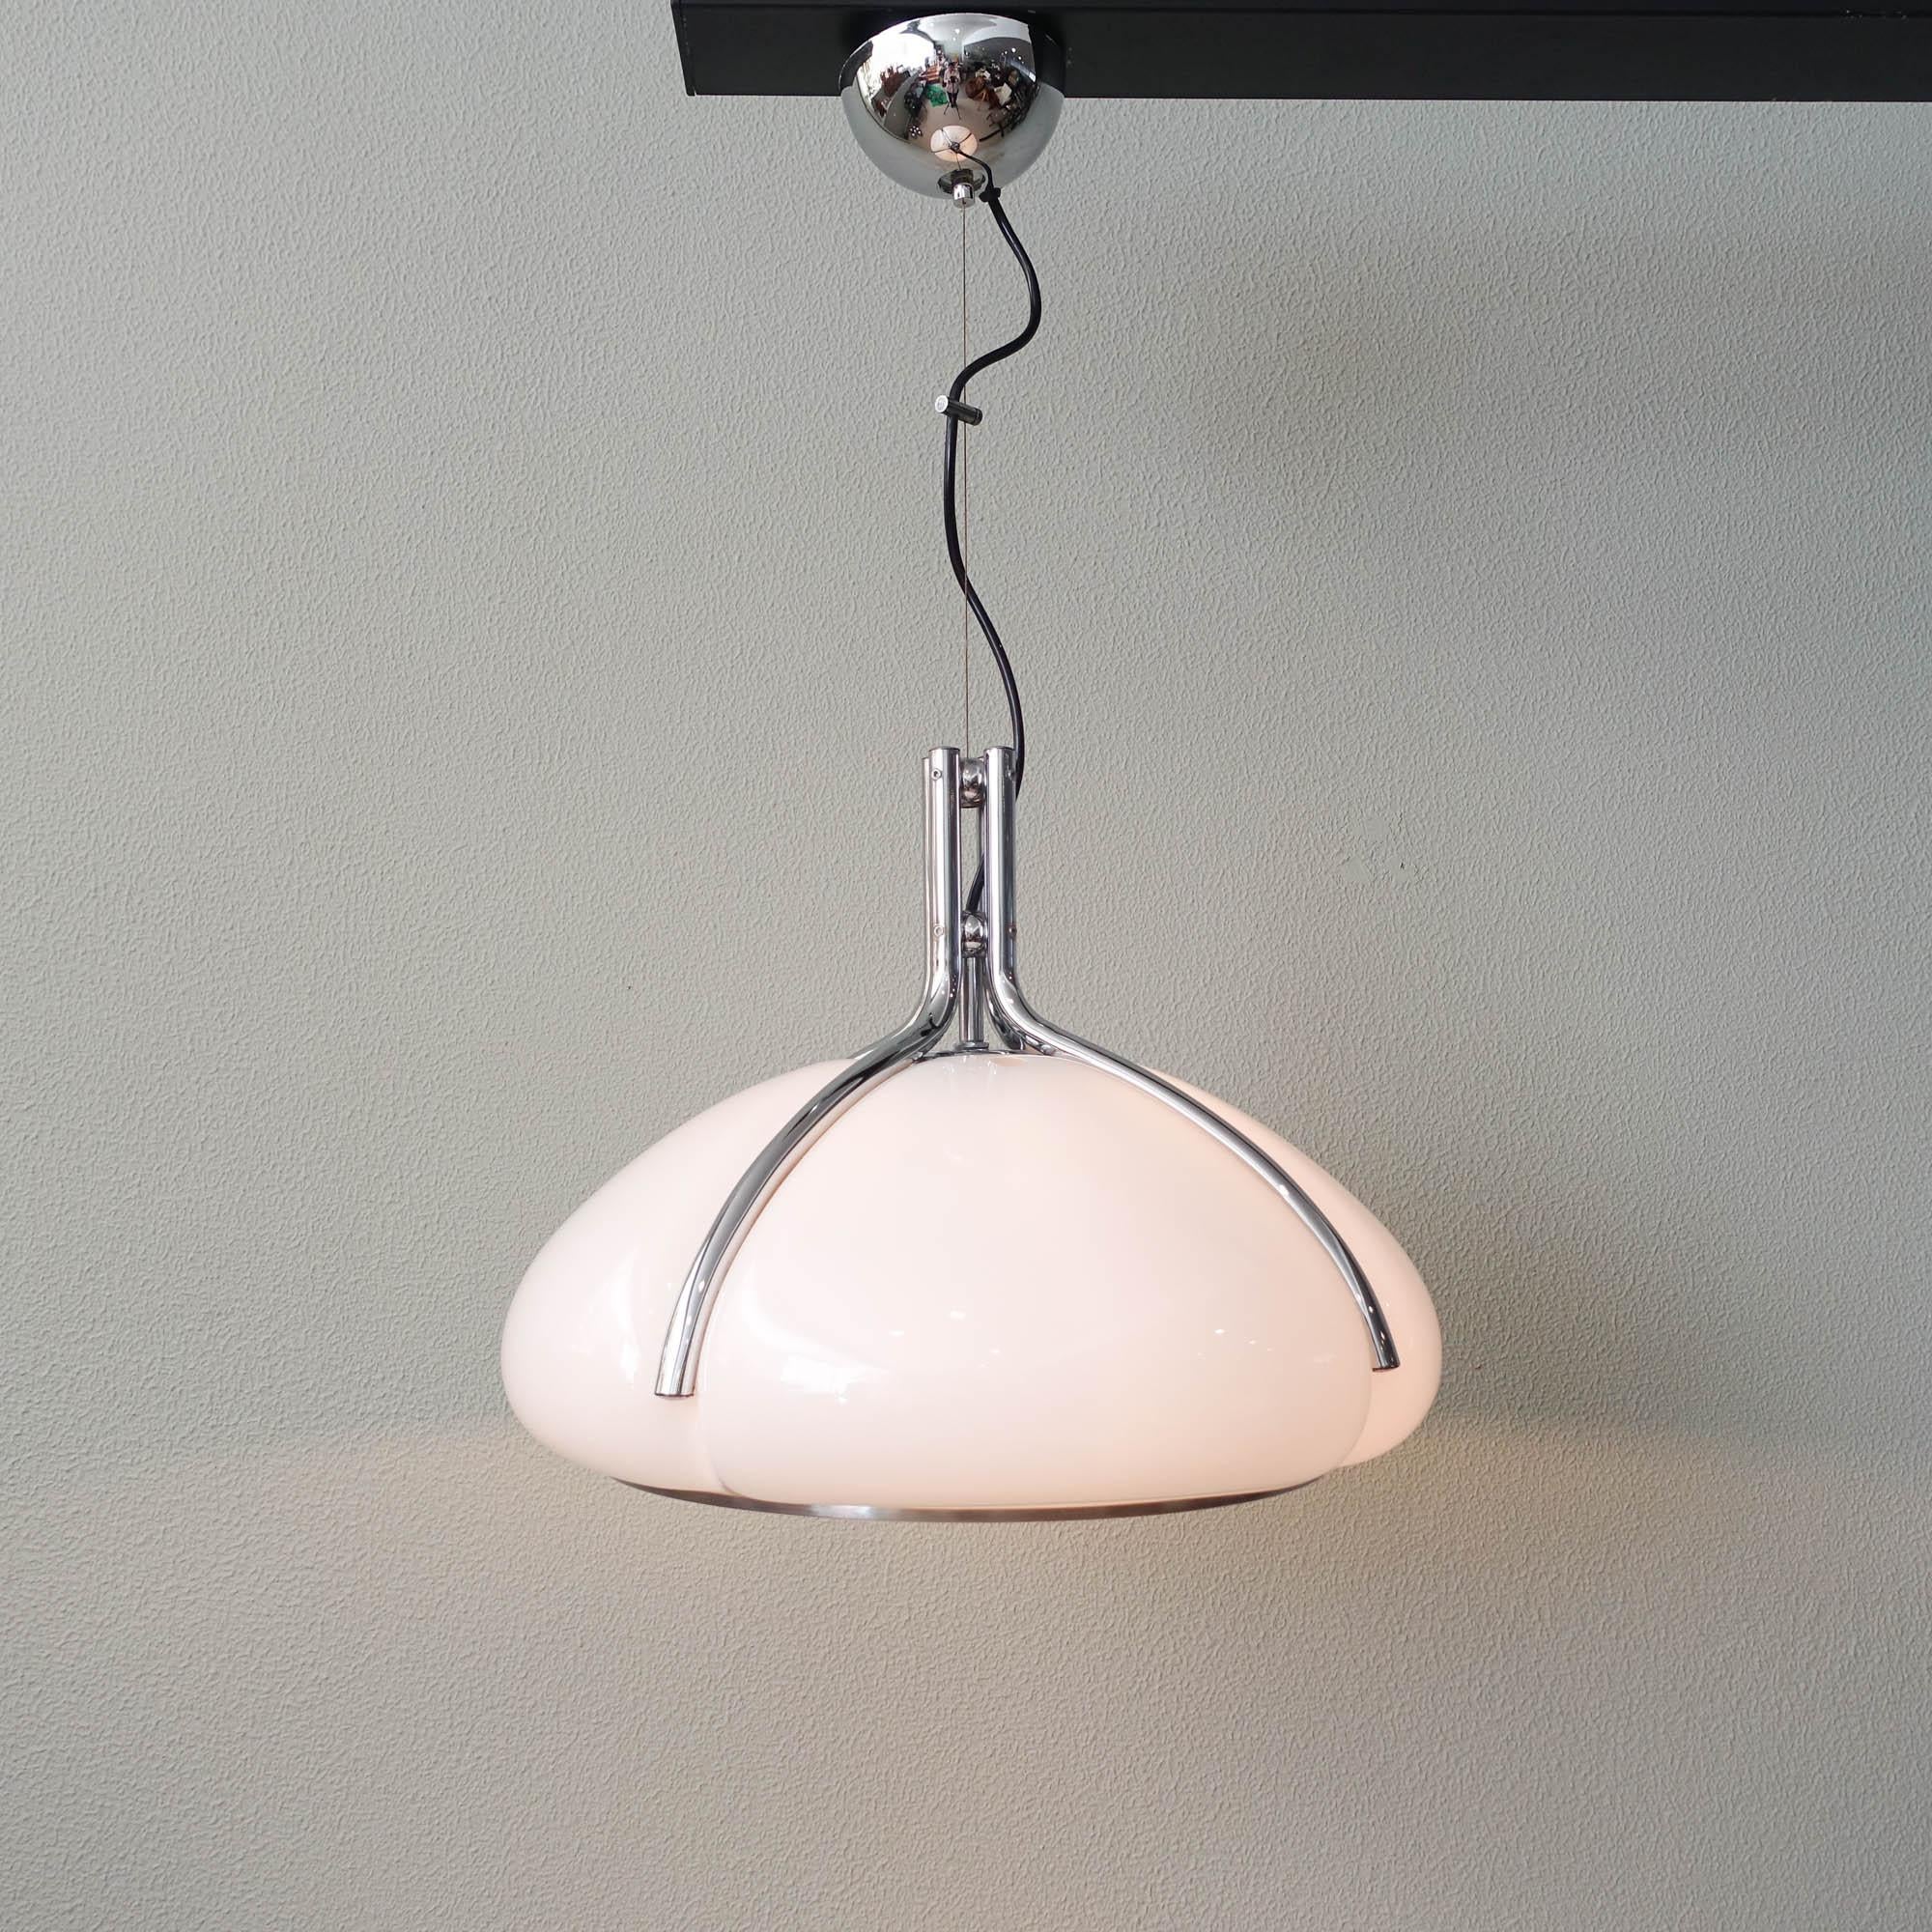 This pendant lamp, 'Quadrifoglio' model, was designed by Gae Aulenti and produced by Harvey Guzzini, in Italy during the 1970's. It is made of methacrylate diffuser with 4 chrome-plated metal curved rods and a chrome reflector below. Any type of